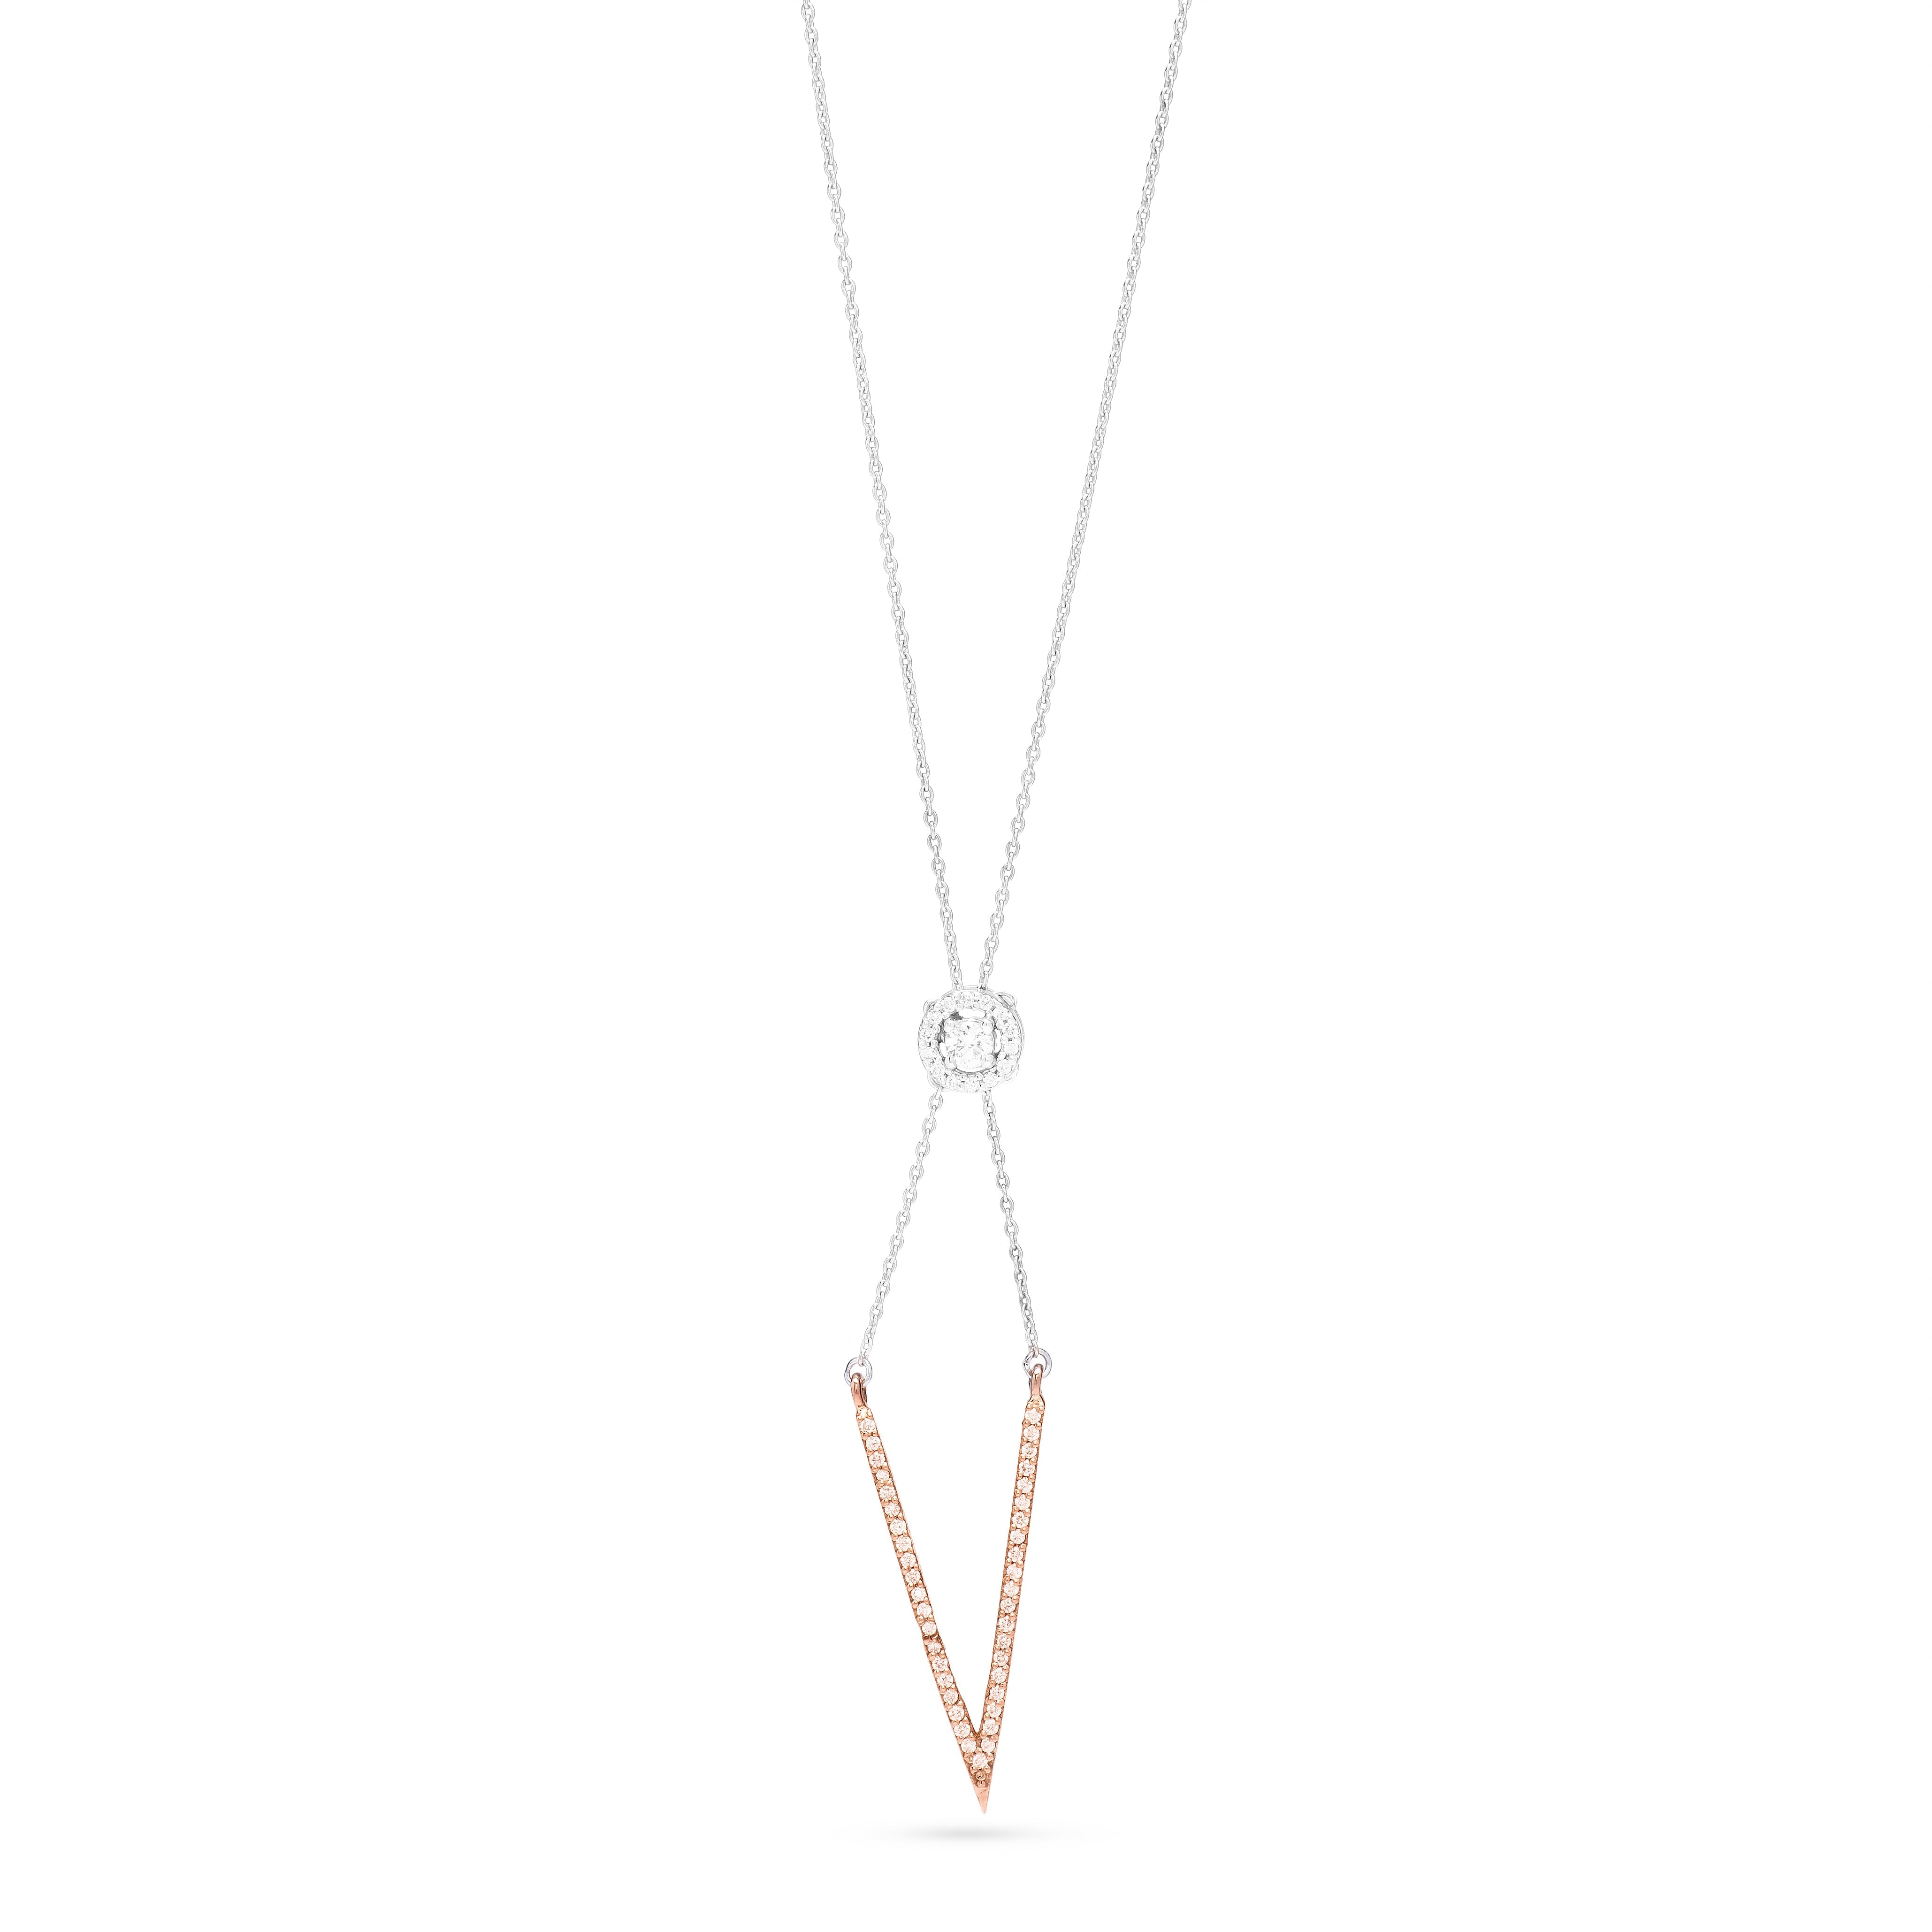 Adjustable Length with Dangling Golden Arrow Diamond Necklace in White 18 K Gold - SIR1087